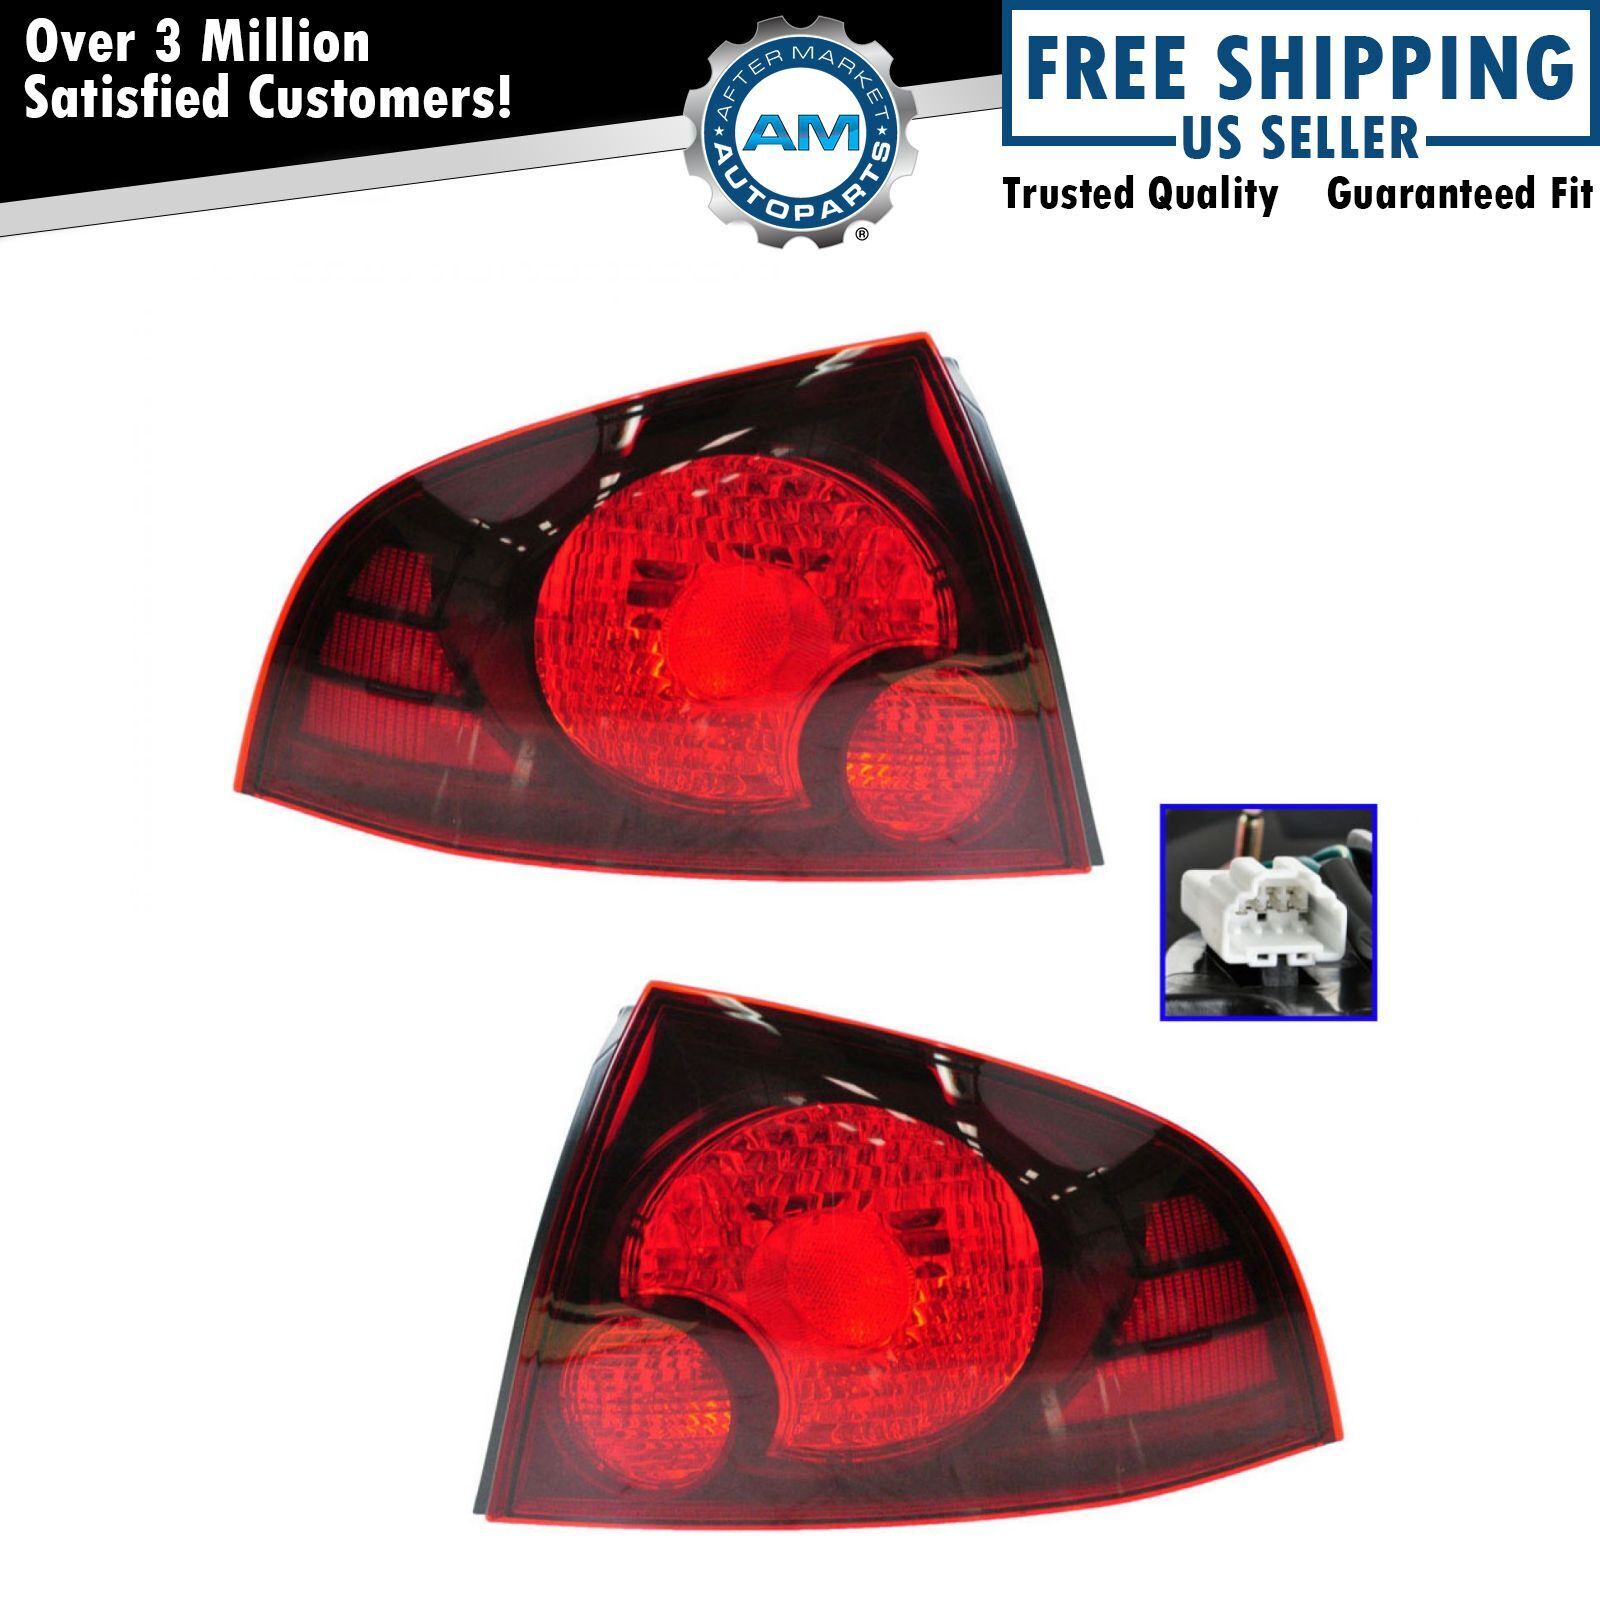 Taillights Taillamps Brake Lights Left & Right Pair Set for 04-06 Sentra SE-R